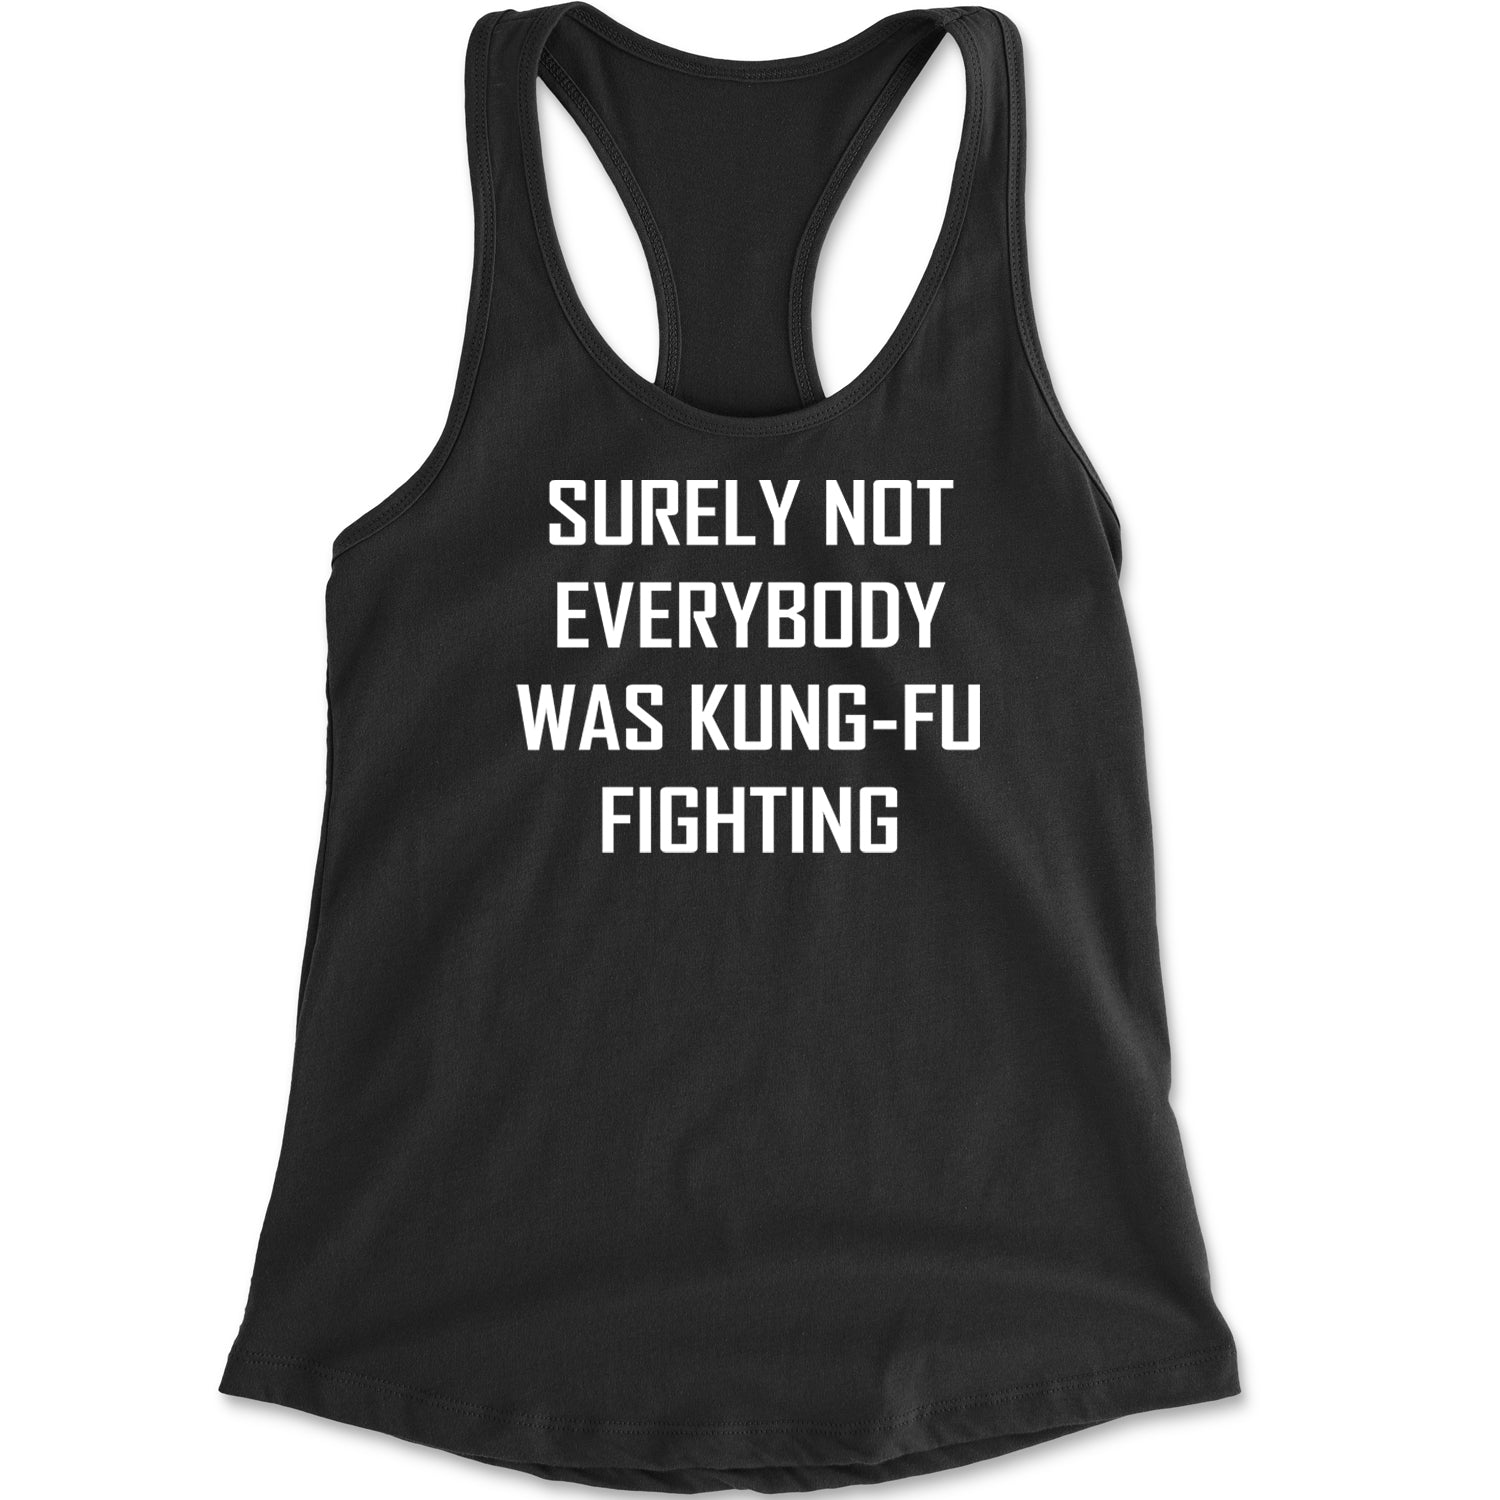 Surely Not Everybody Was Kung-Fu Fighting  Racerback Tank Top for Women